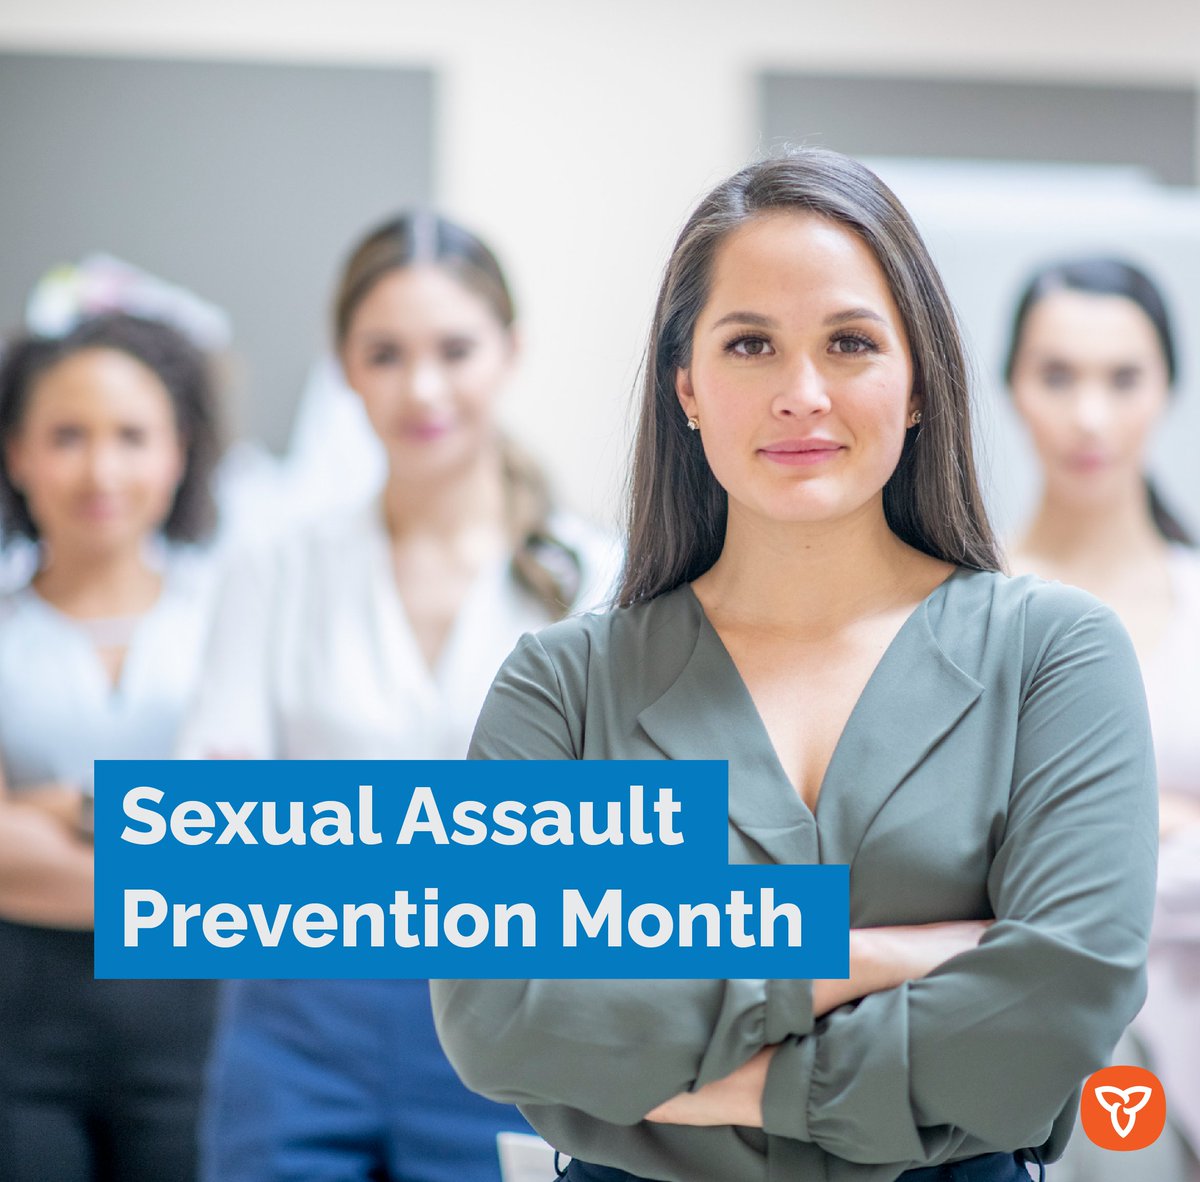 Ontario recognizes Sexual Assault Prevention Month and is raising awareness about sexual assault and all forms of gender-based violence. Read the statement from Minister Parsa and Associate Minister Williams: news.ontario.ca/en/statement/1…